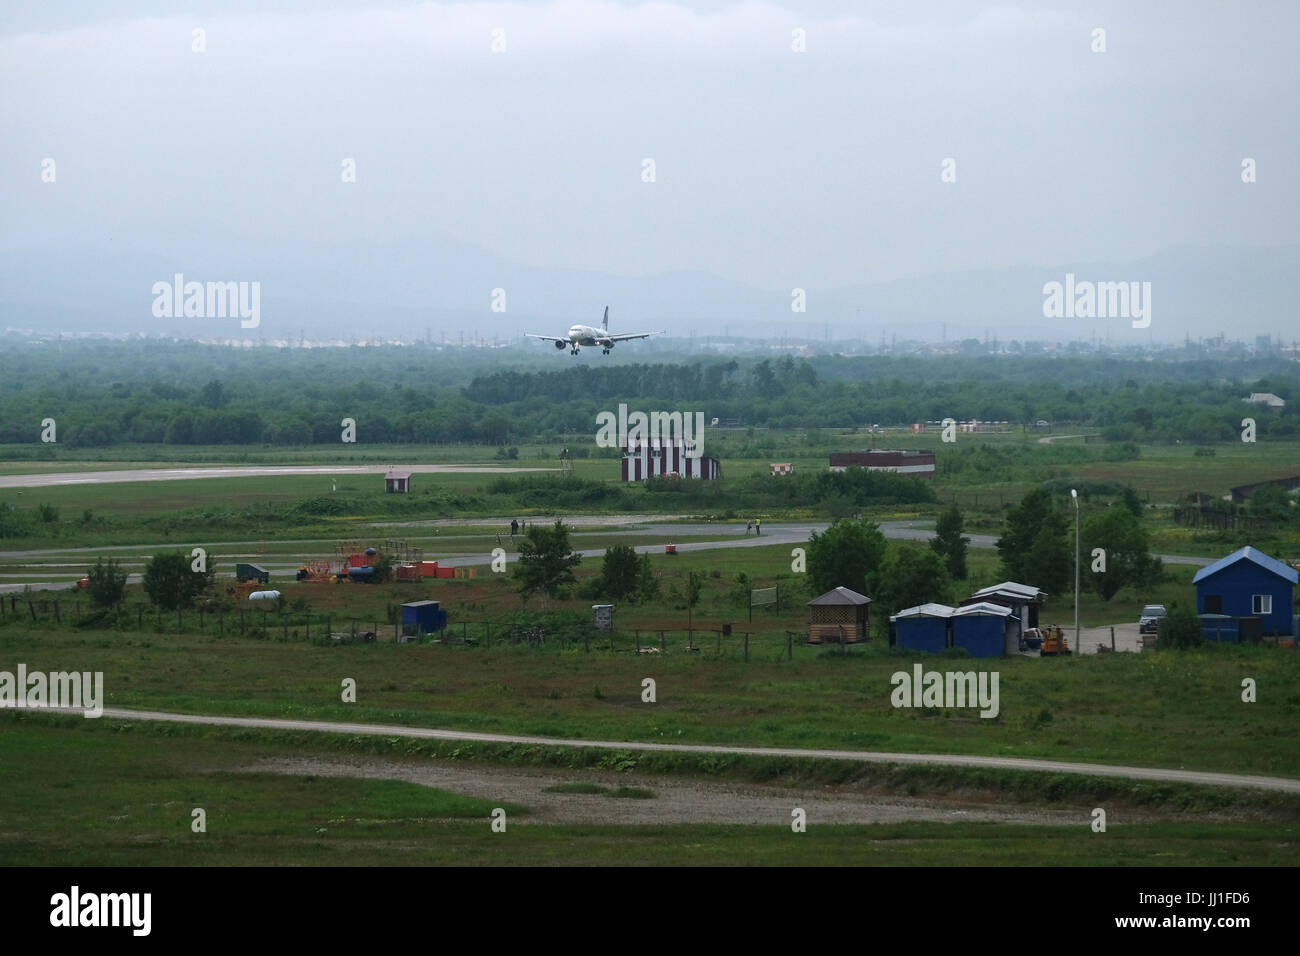 An airplane landing in Yuzhno-Sakhalinsk Airport also called Khomutovo in the city of Yuzhno-Sakhalinsk, in the island of Sakhalin, in the Pacific Ocean. Russia Stock Photo